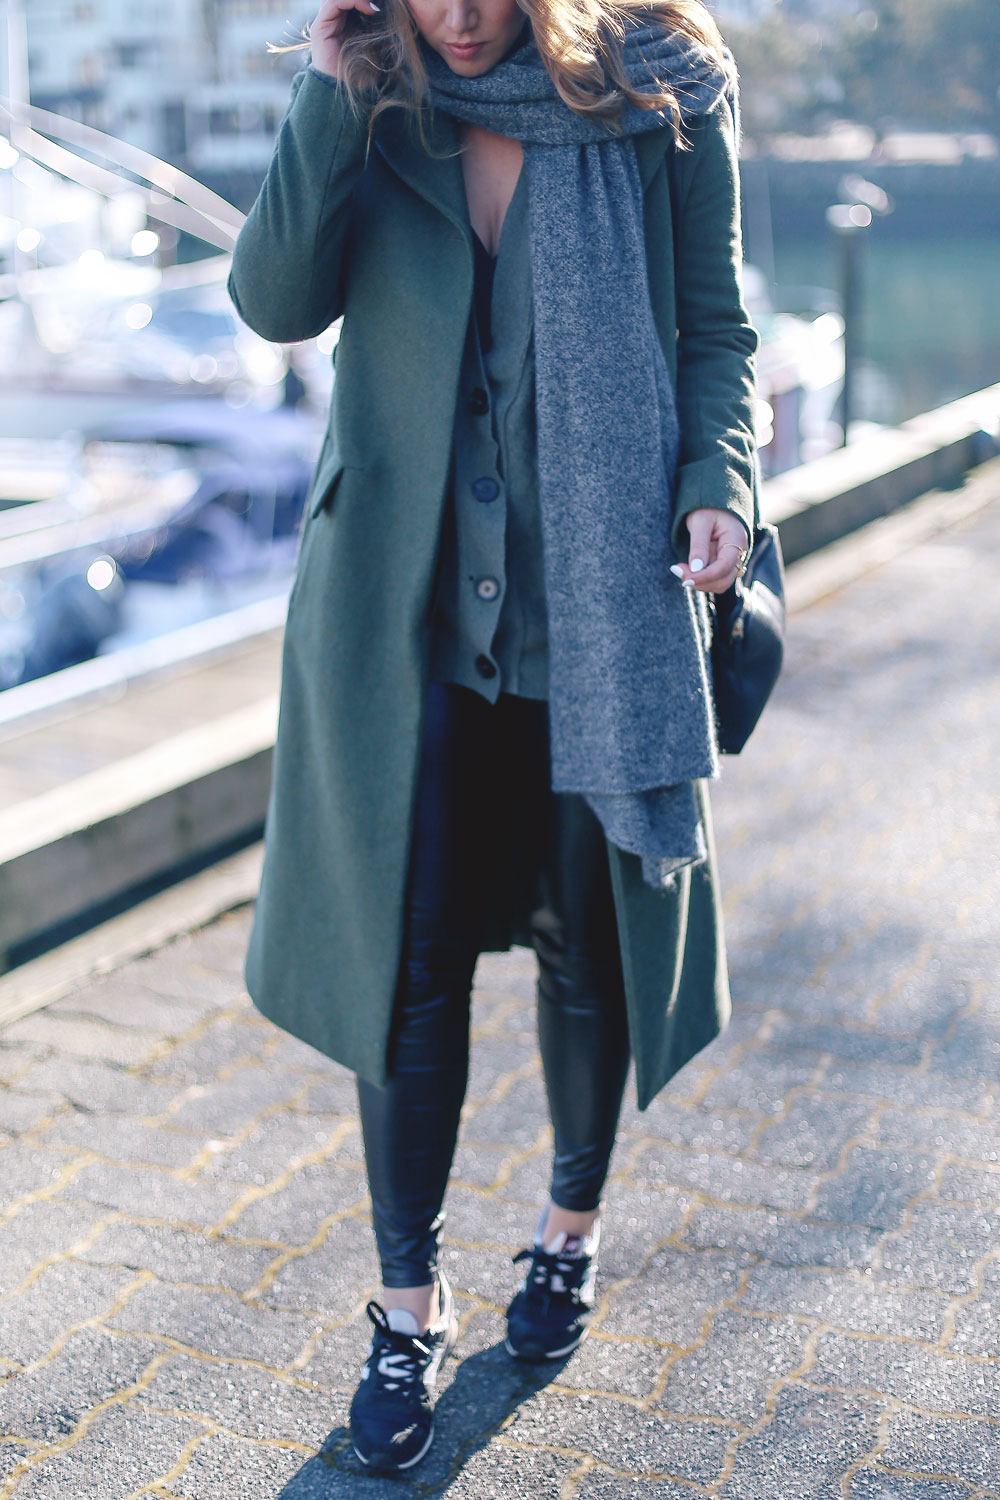 Tips to style sneakers in New Balance sneakers, a statement green coat, leather leggings and cashmere cardigan